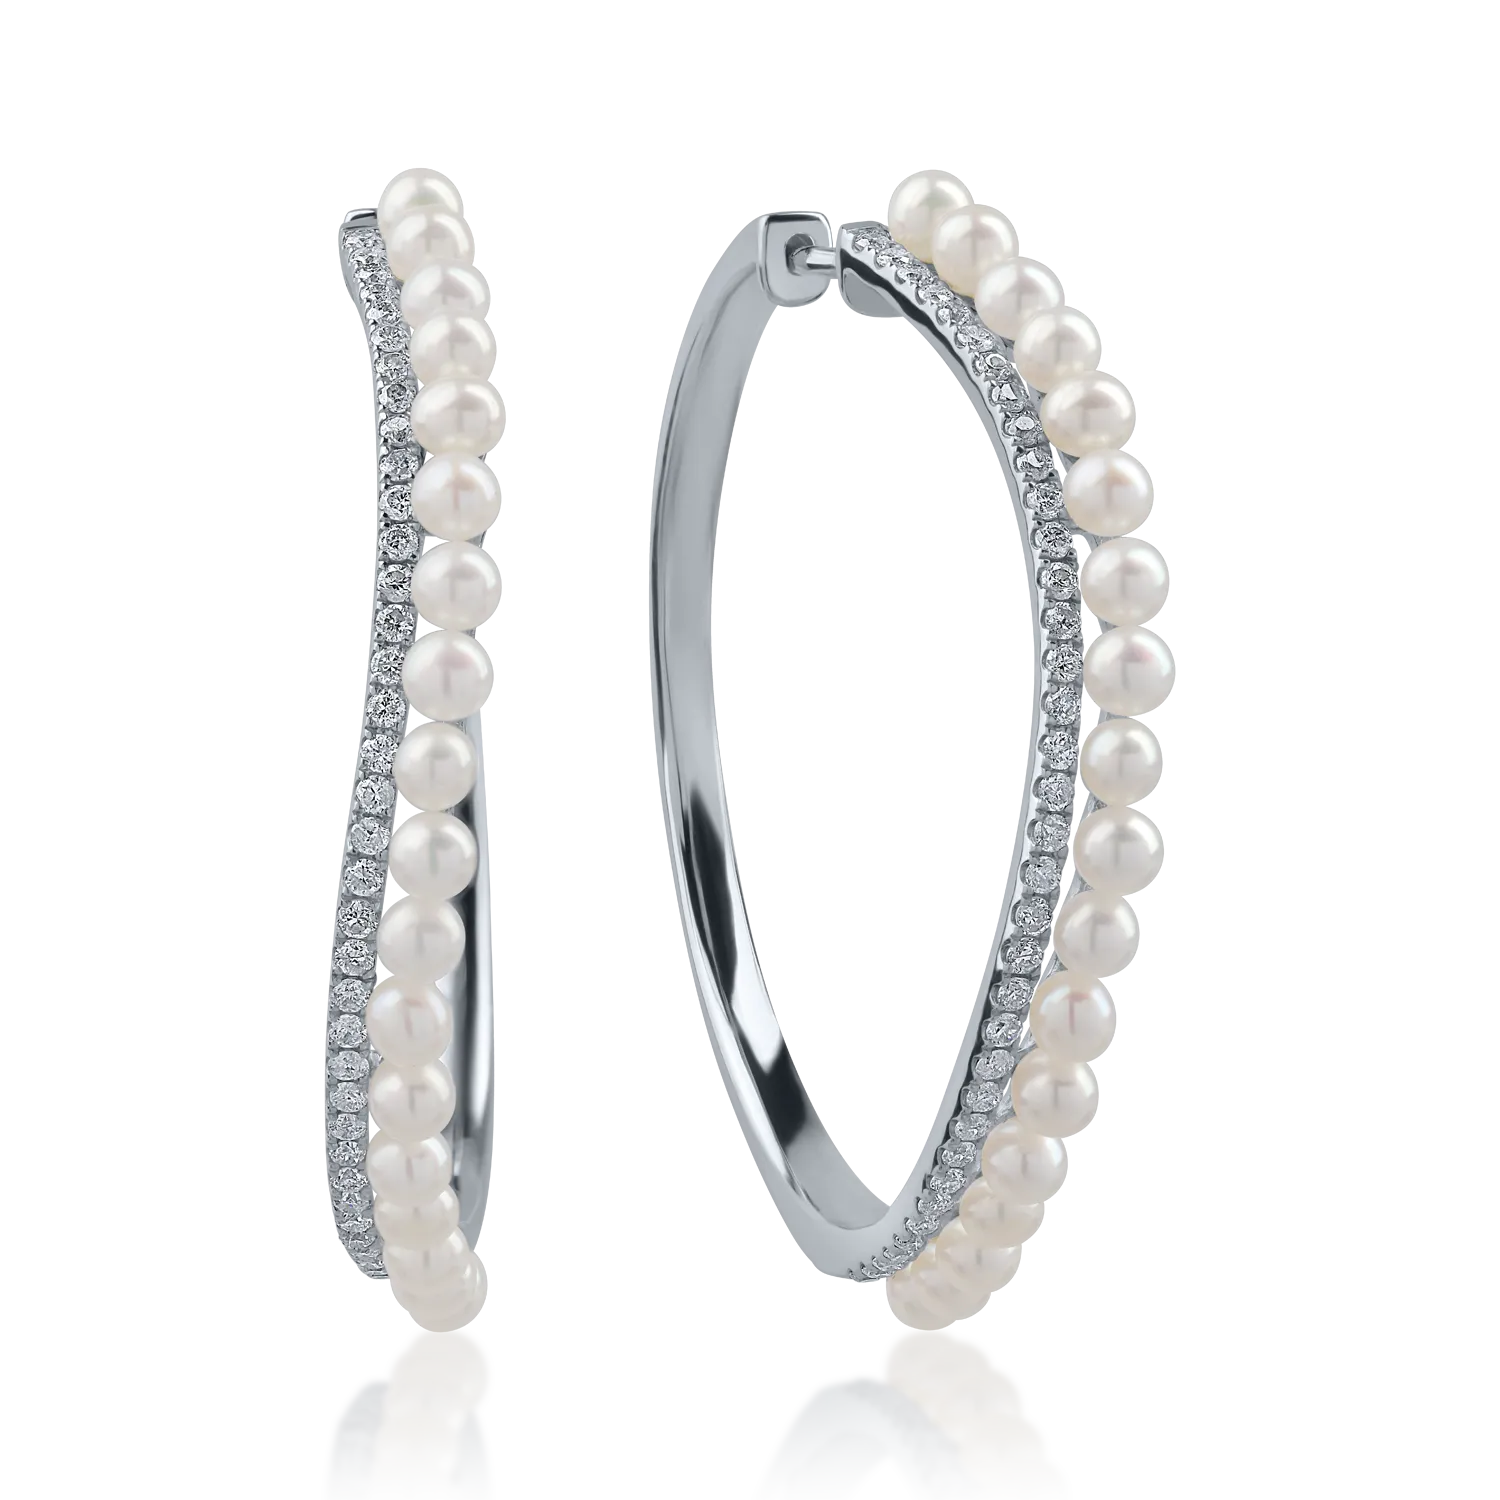 White gold earrings with 5.04ct fresh water pearls and 0.5ct diamonds